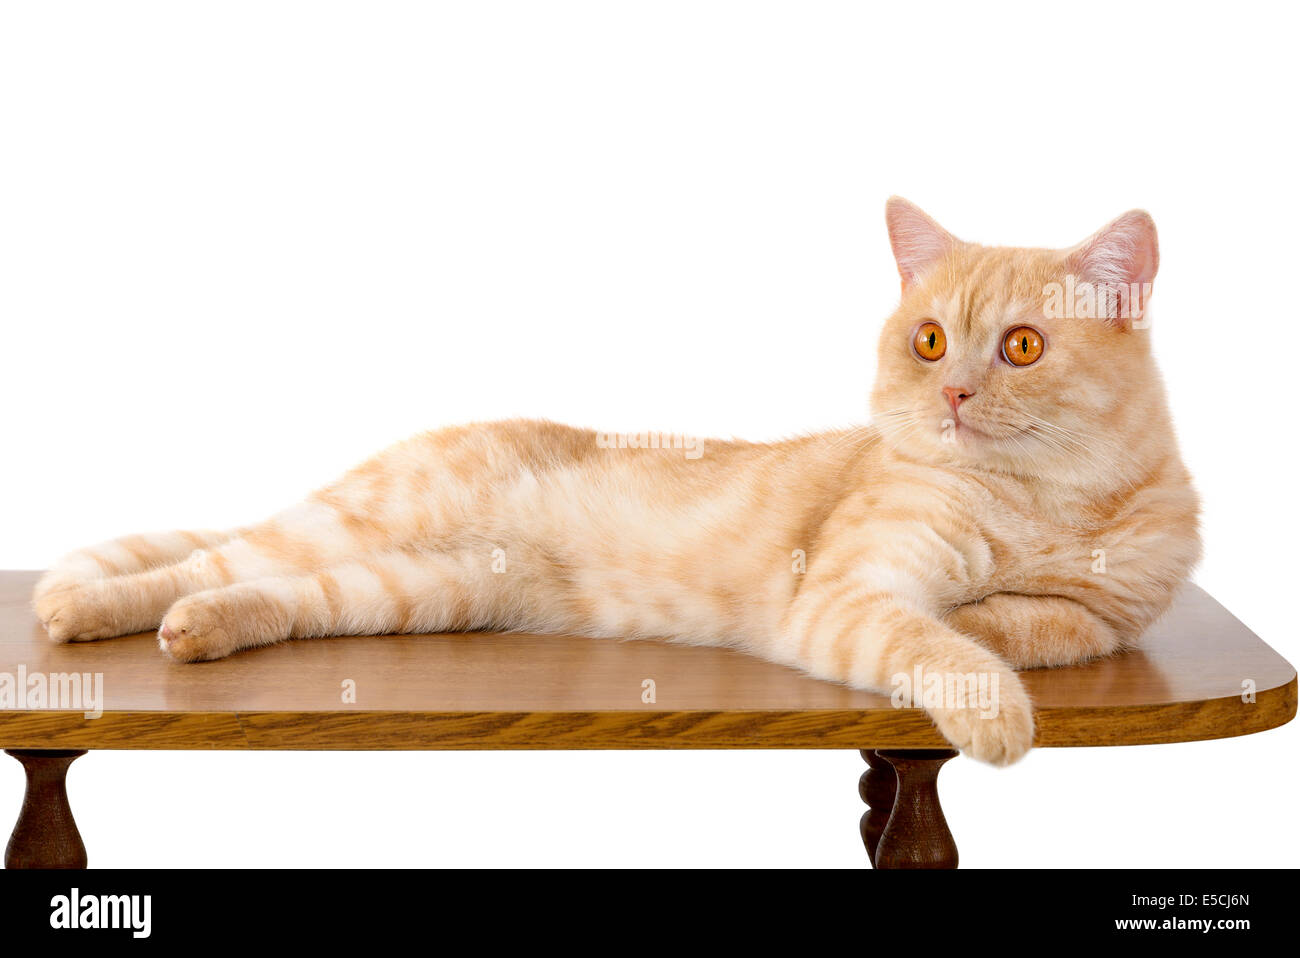 The red cat lies on a table Stock Photo